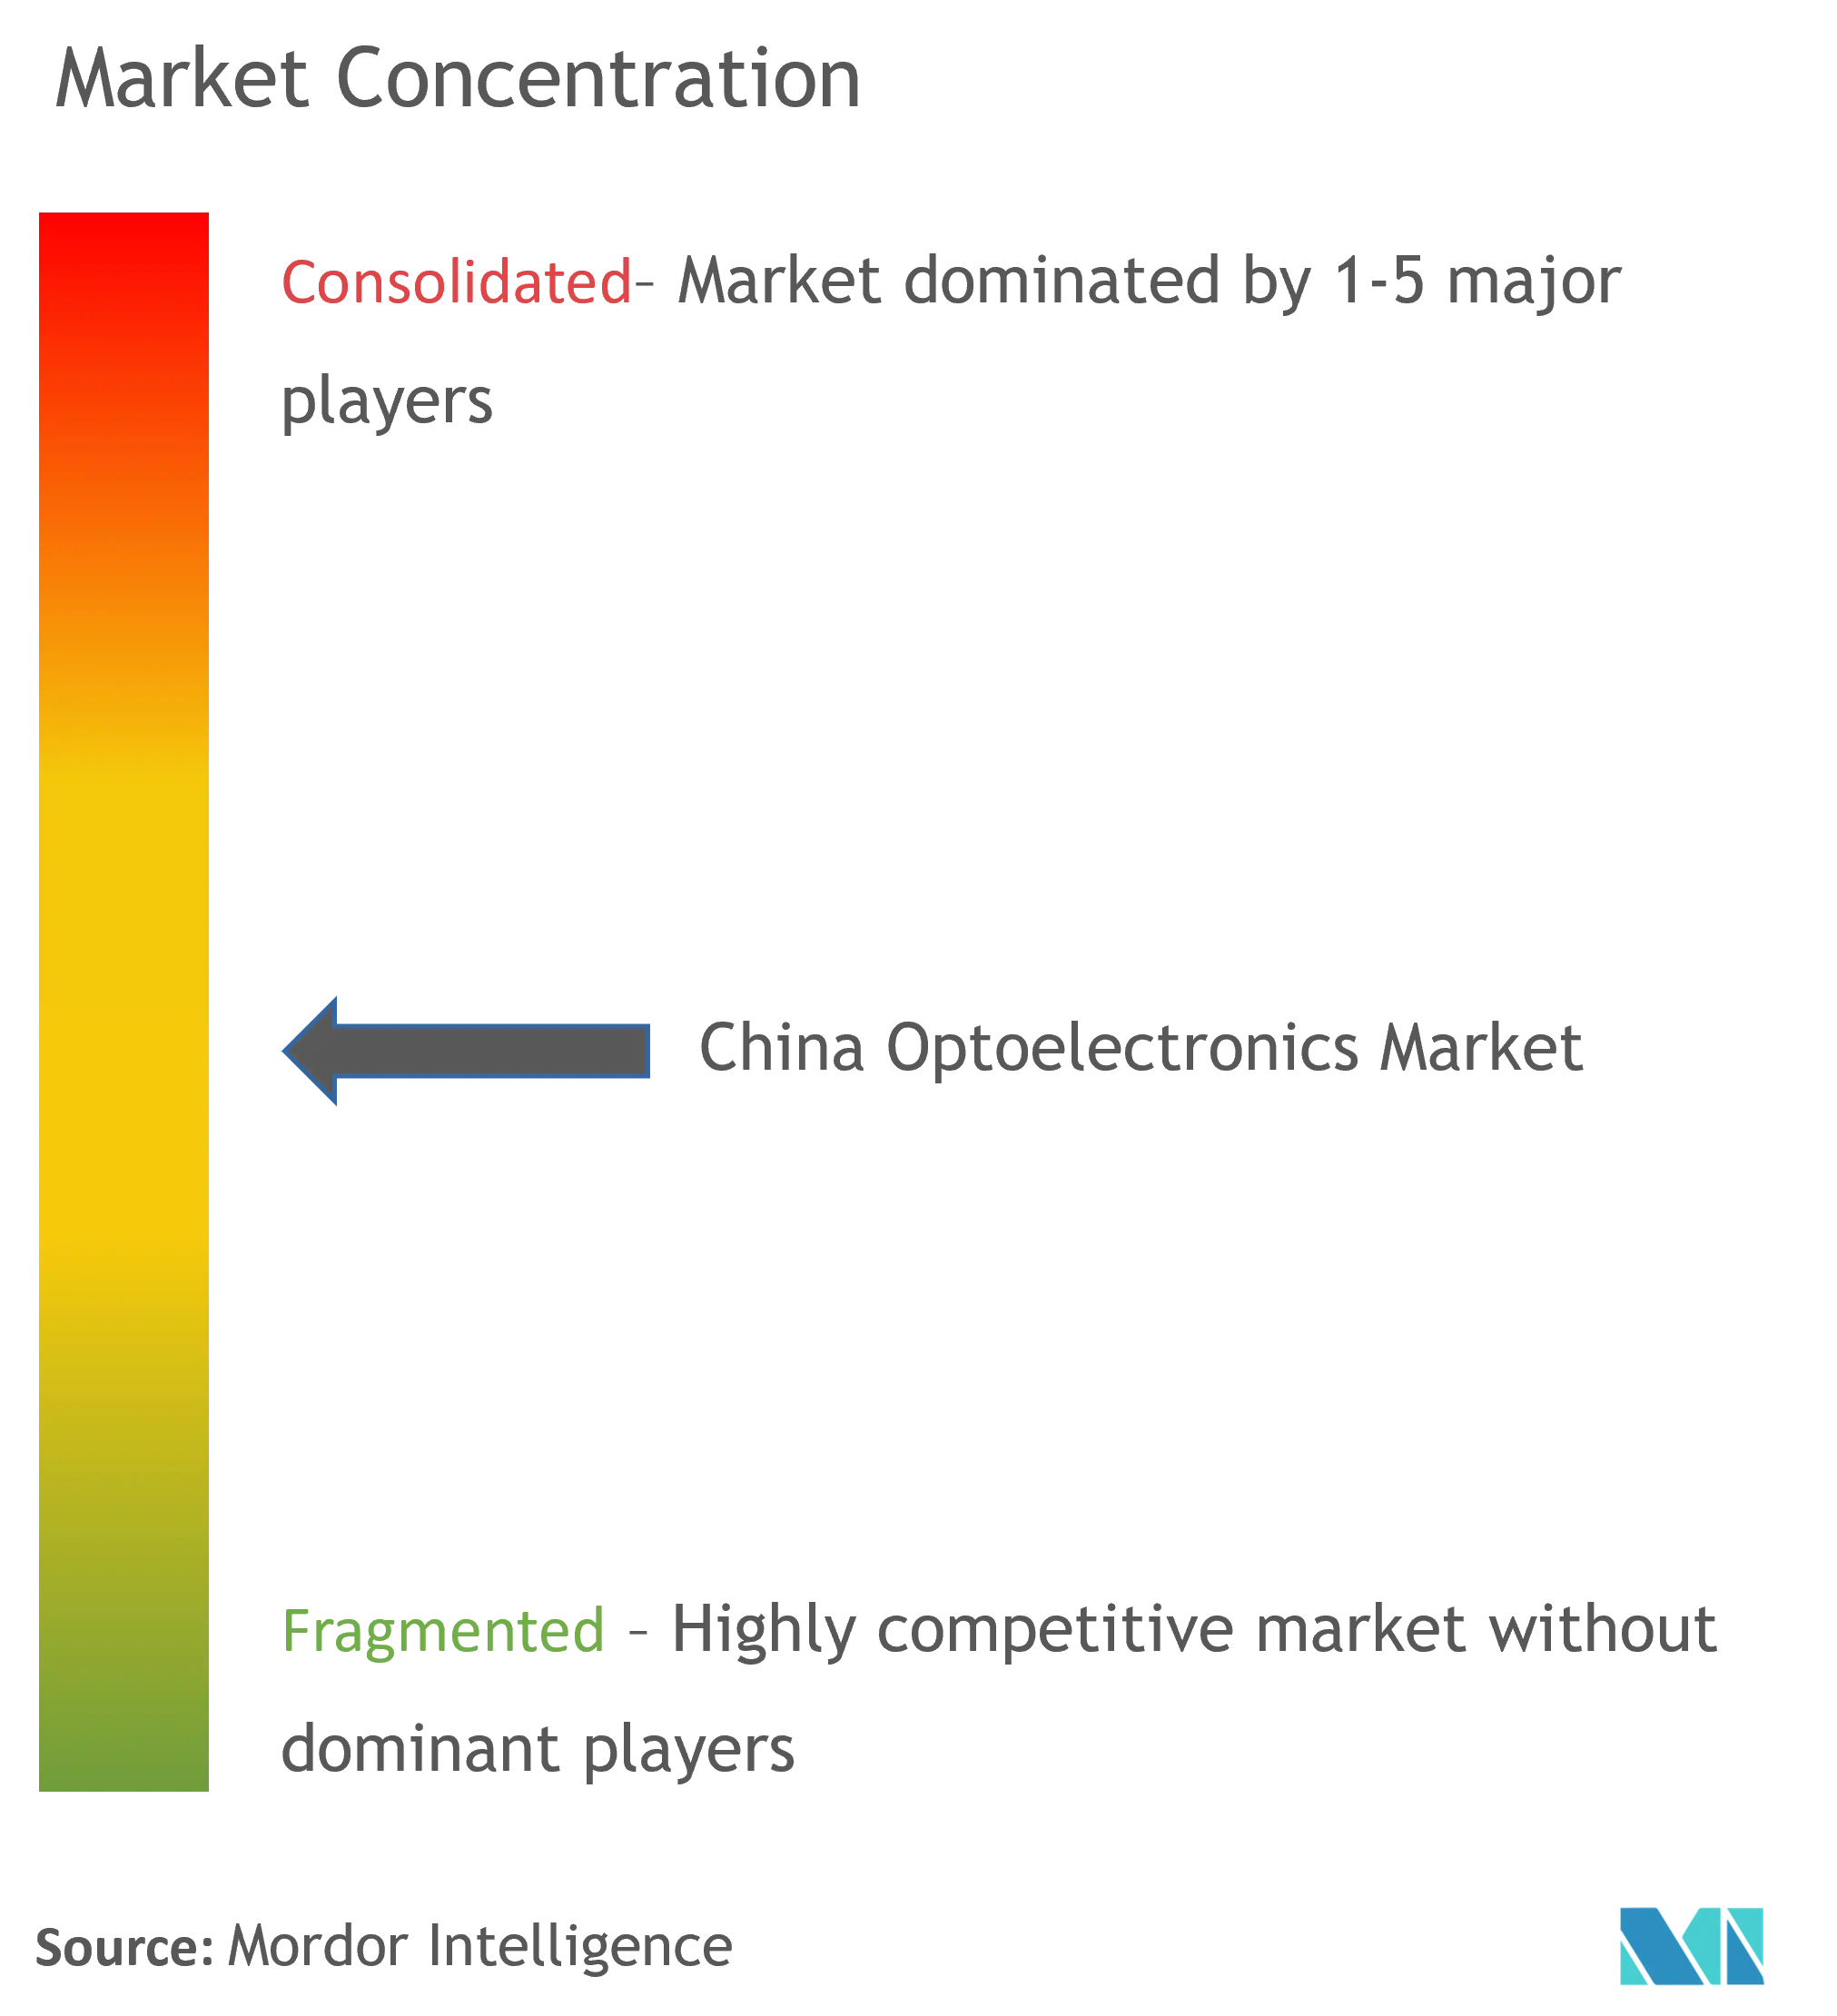 China Optoelectronics Market Concentration